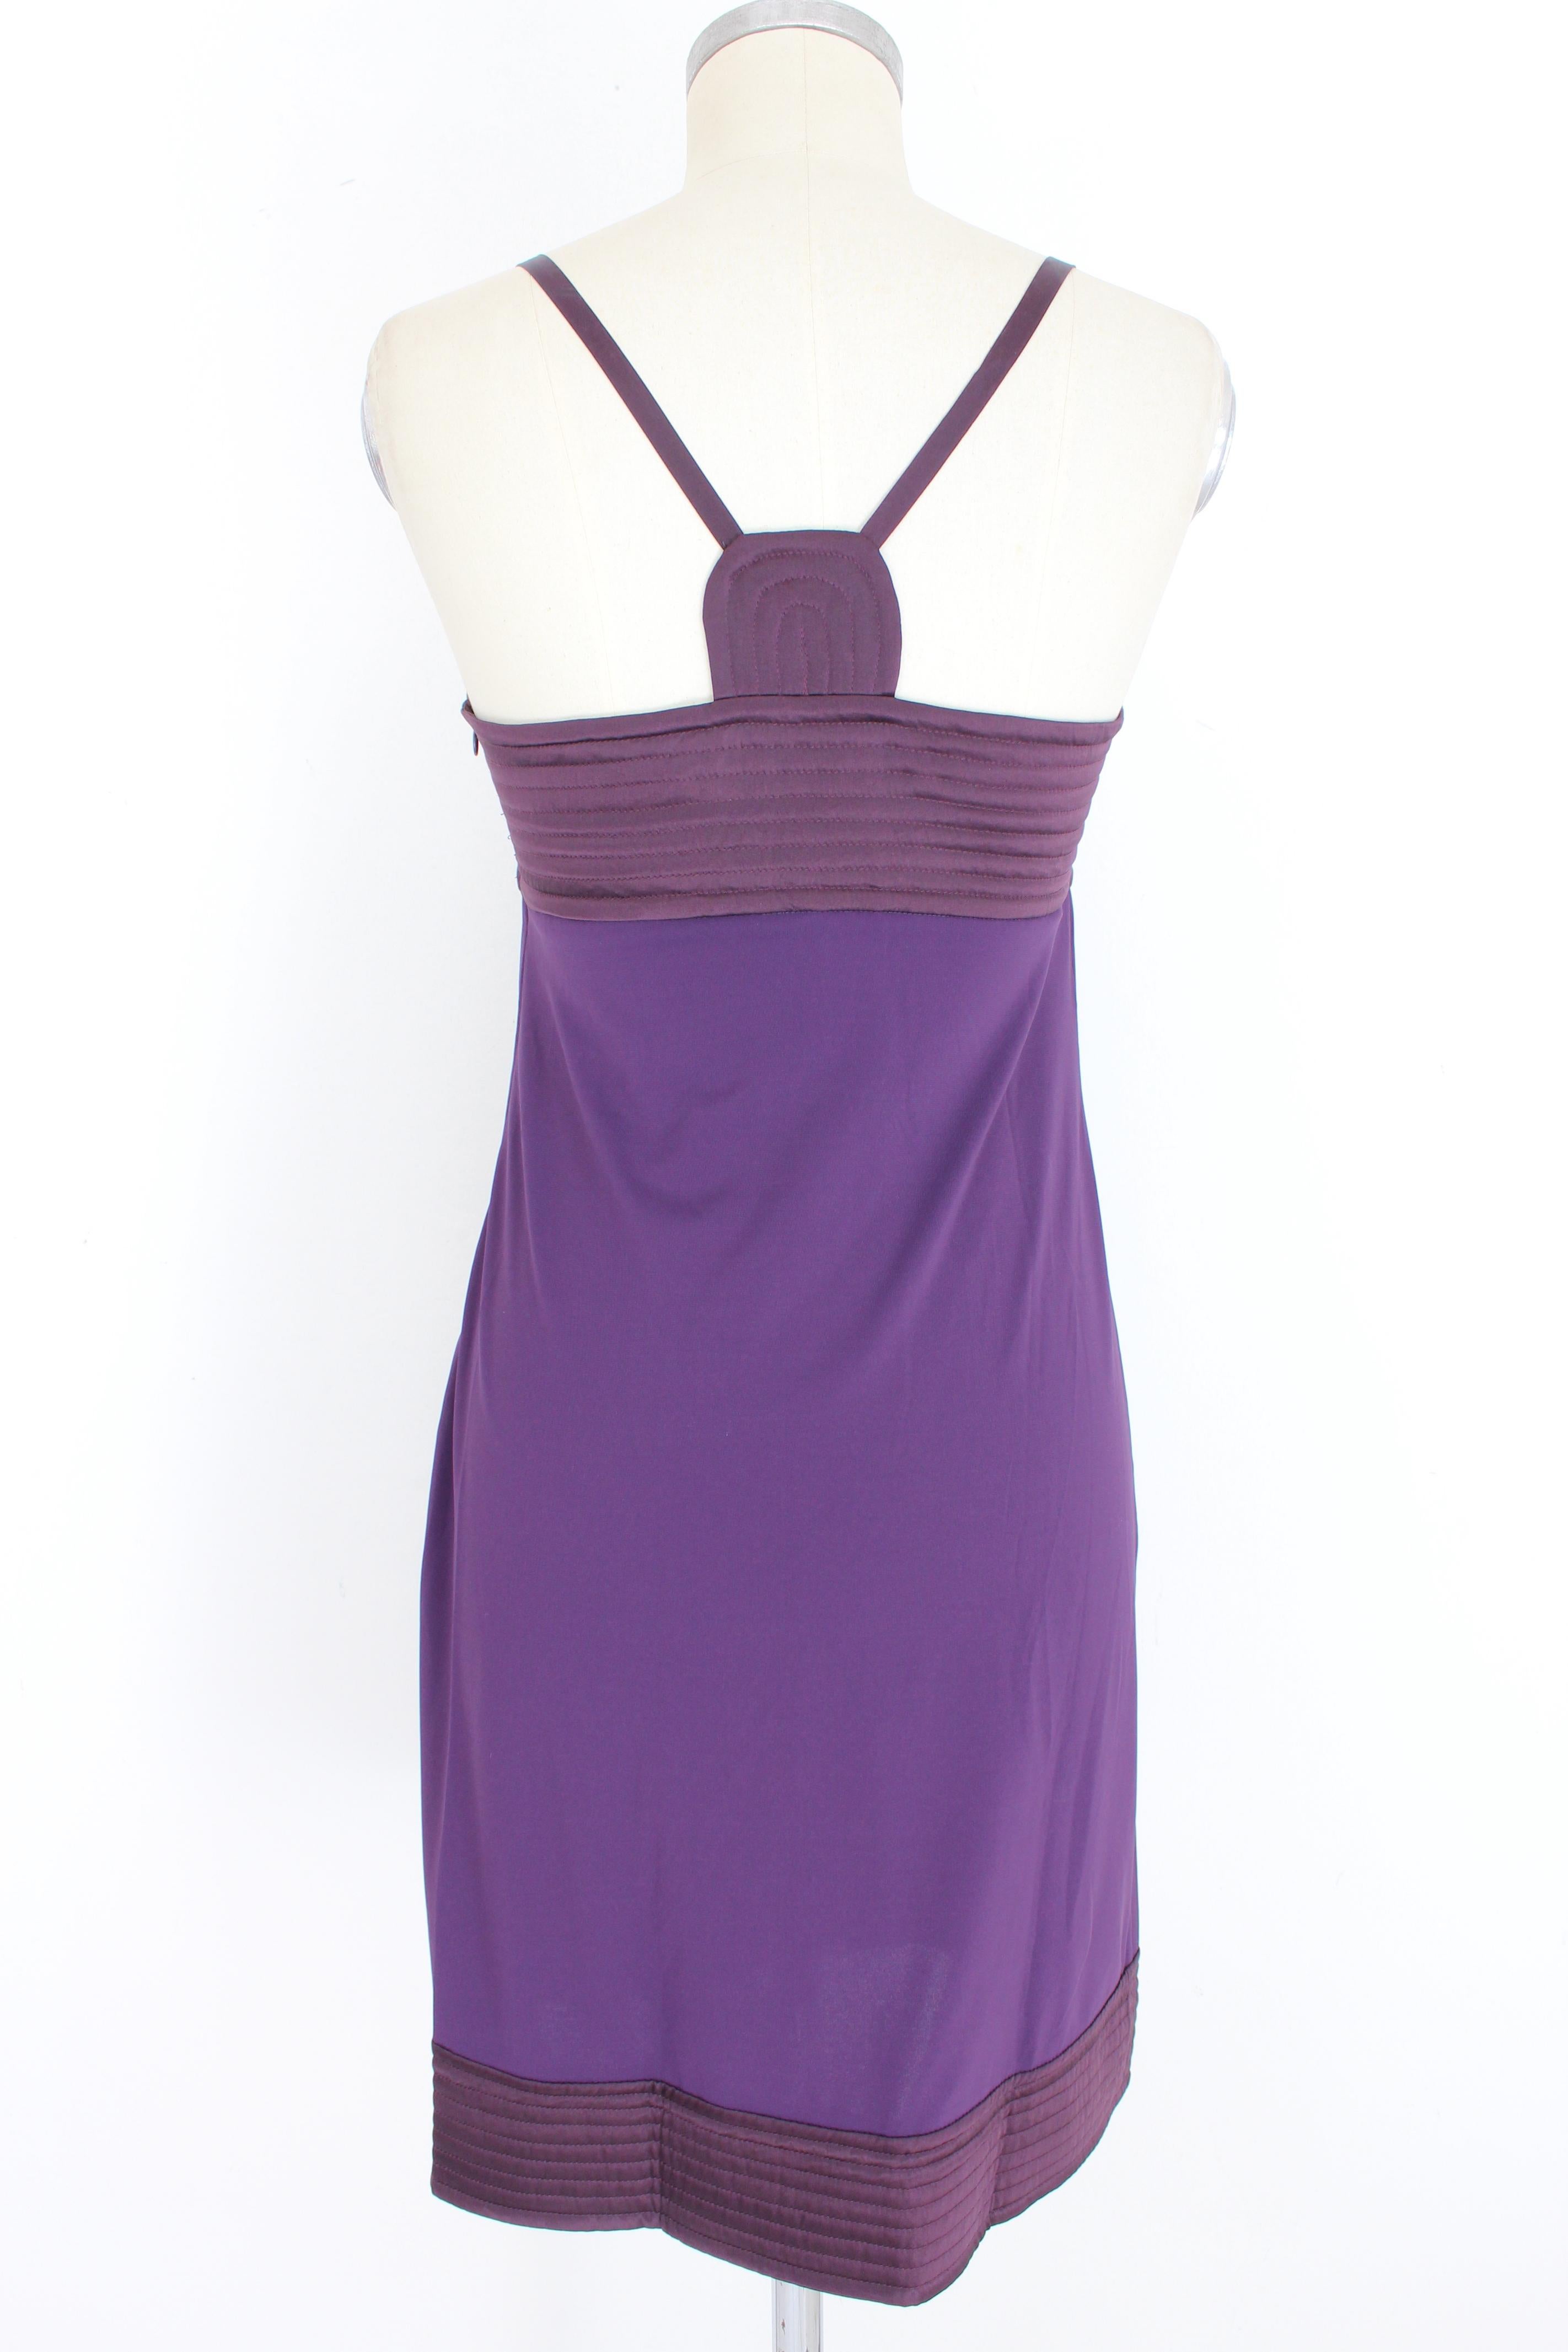 Philosophy by Alberta Ferretti 2000s woman dress. Elegant sheath dress, knee length. Purple color, 75% acetate fabric, 20% polyamide, 5% other fibers, the upper part of the chest and the final band, 100% silk fabric. Made in Italy.

Condition: